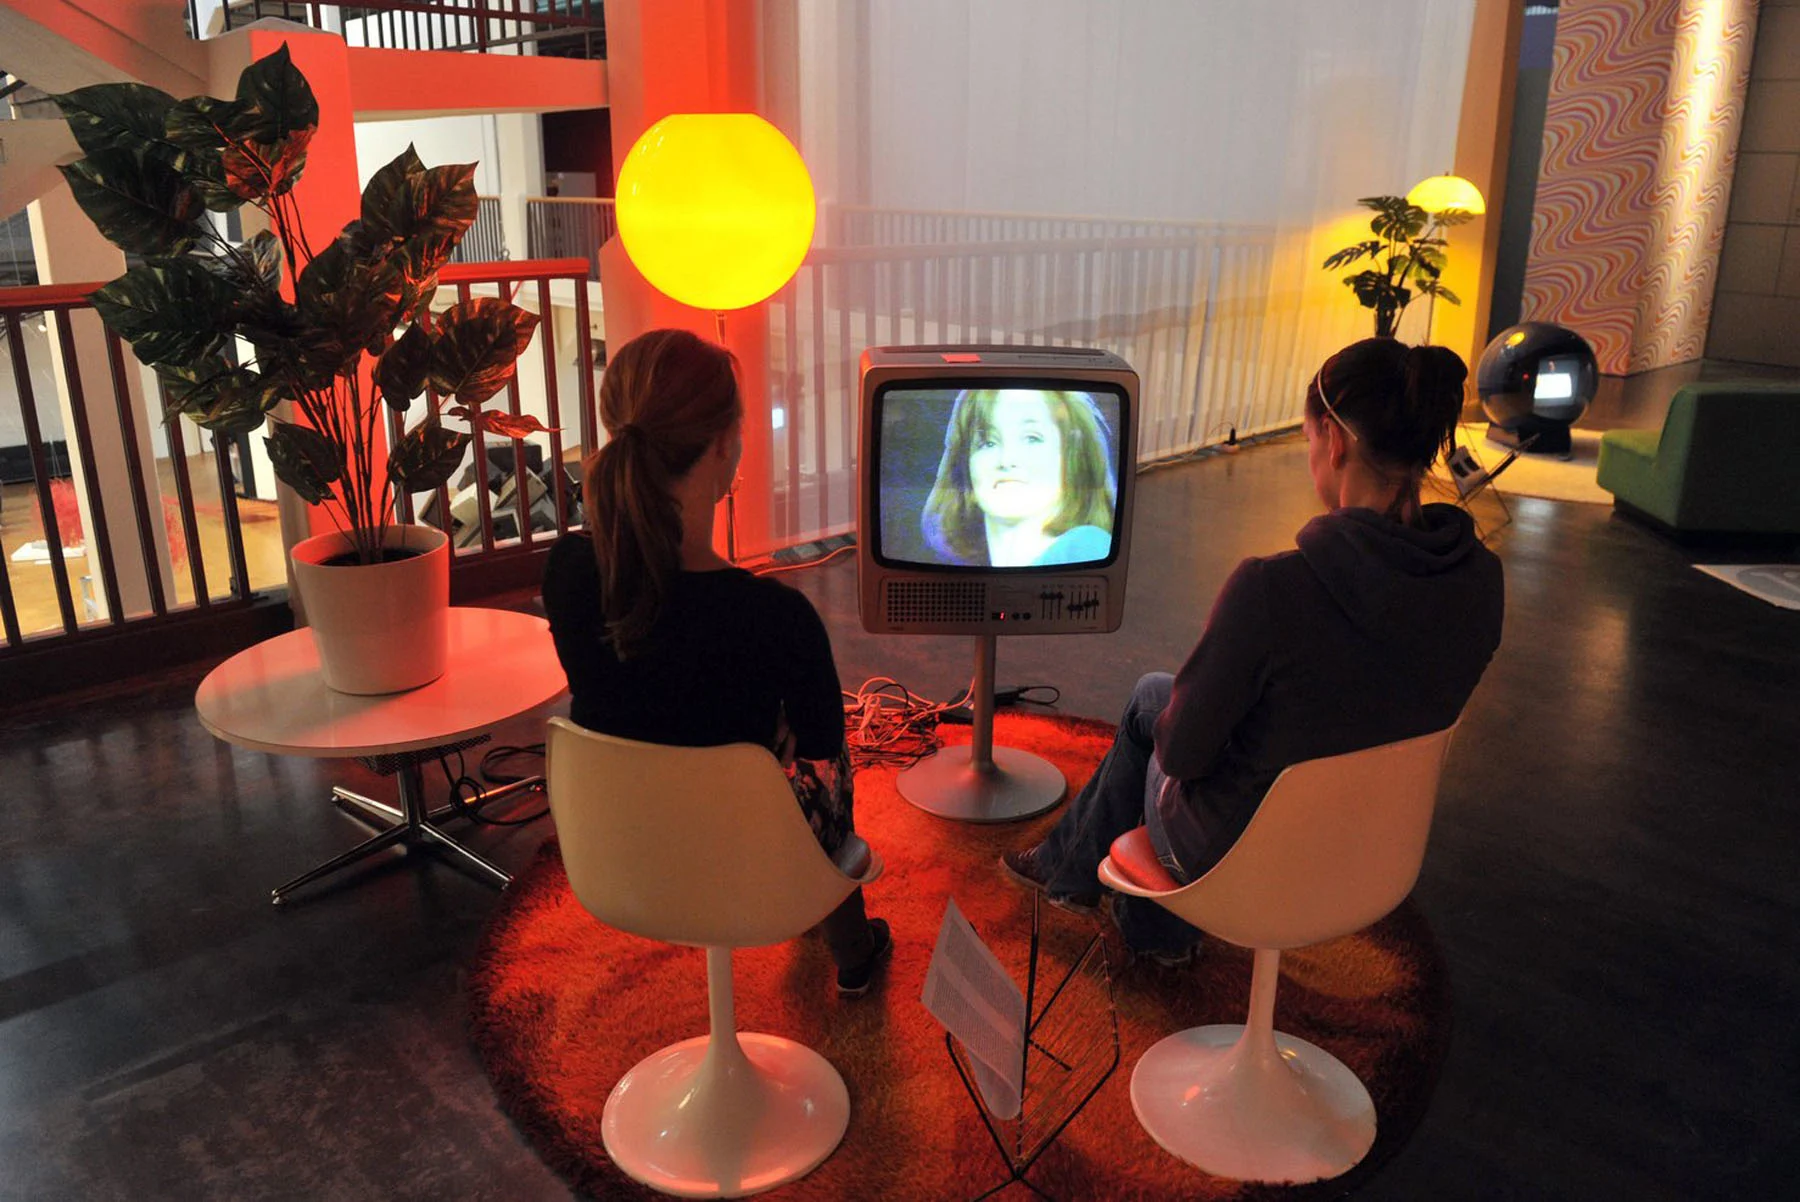 Two women sit side by side in white chairs, watching someone on the television in front of them. Around them are potted plants and furniture reminiscent of the 1960s. The room is illuminated in a red and yellow glow.